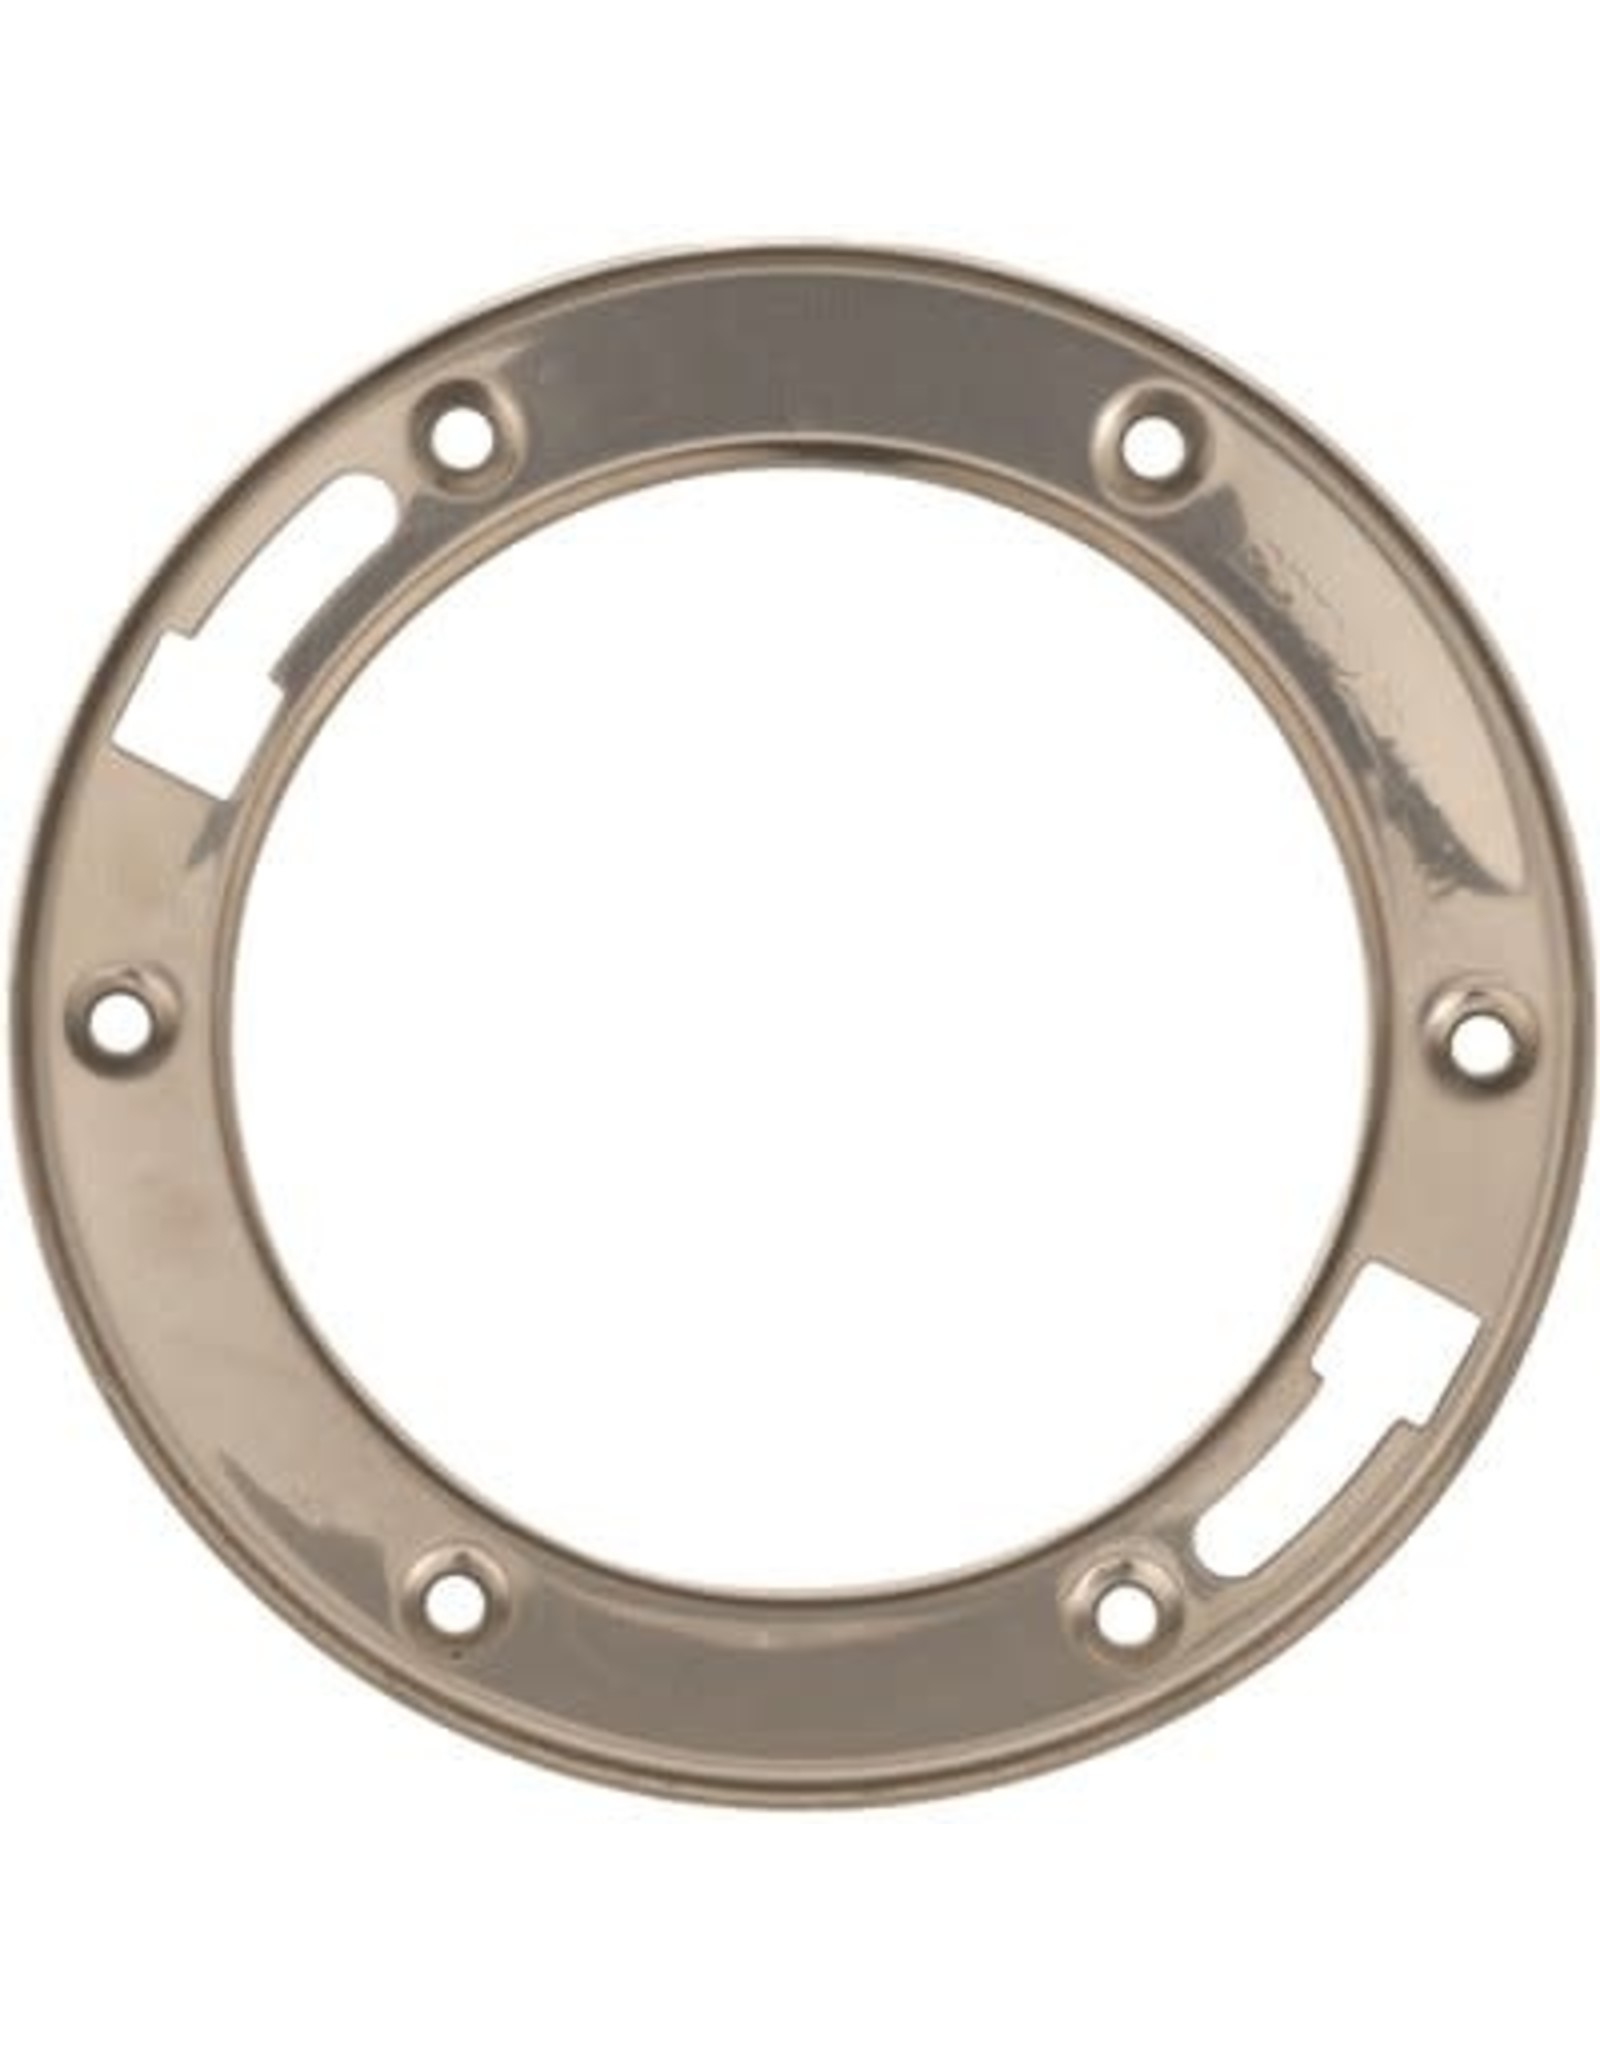 Stainless Steel Toilet Flange Replacement Ring